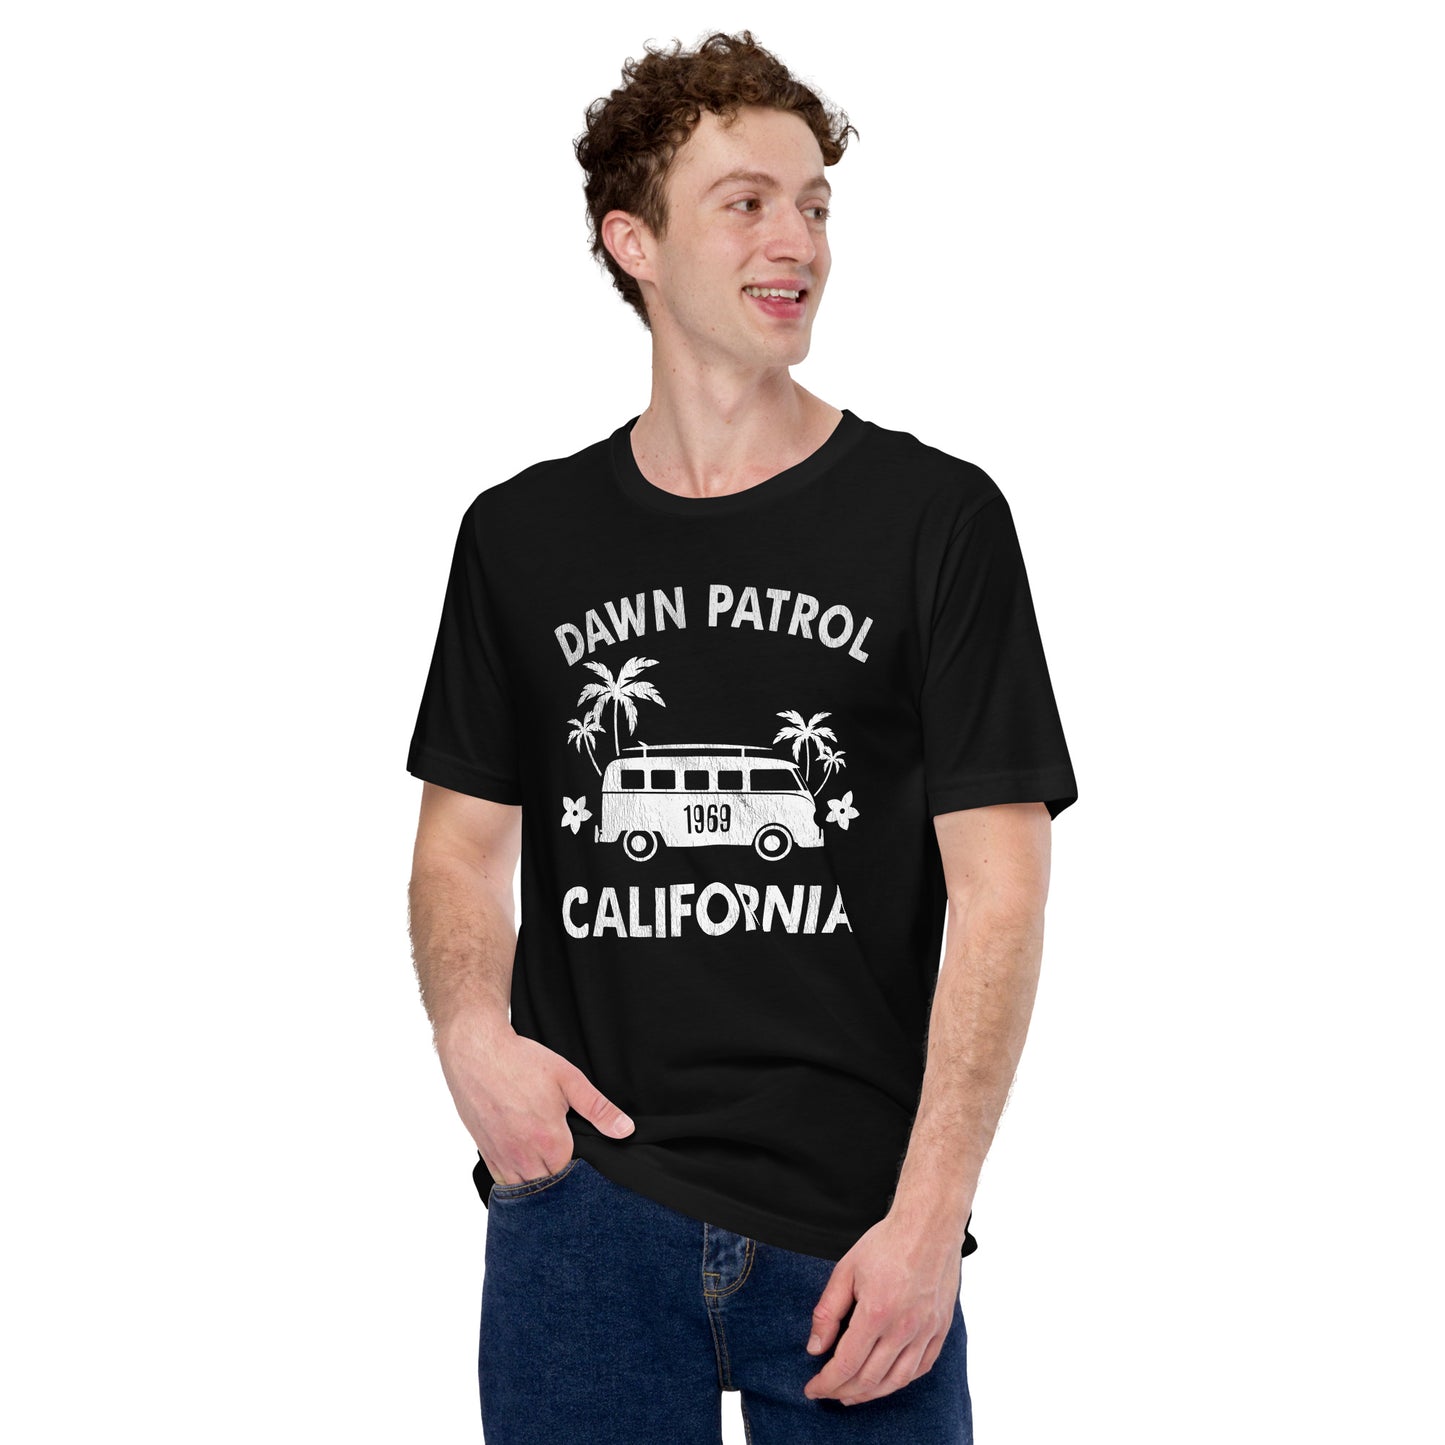 Dawn Patrol California  - available in 13 colors